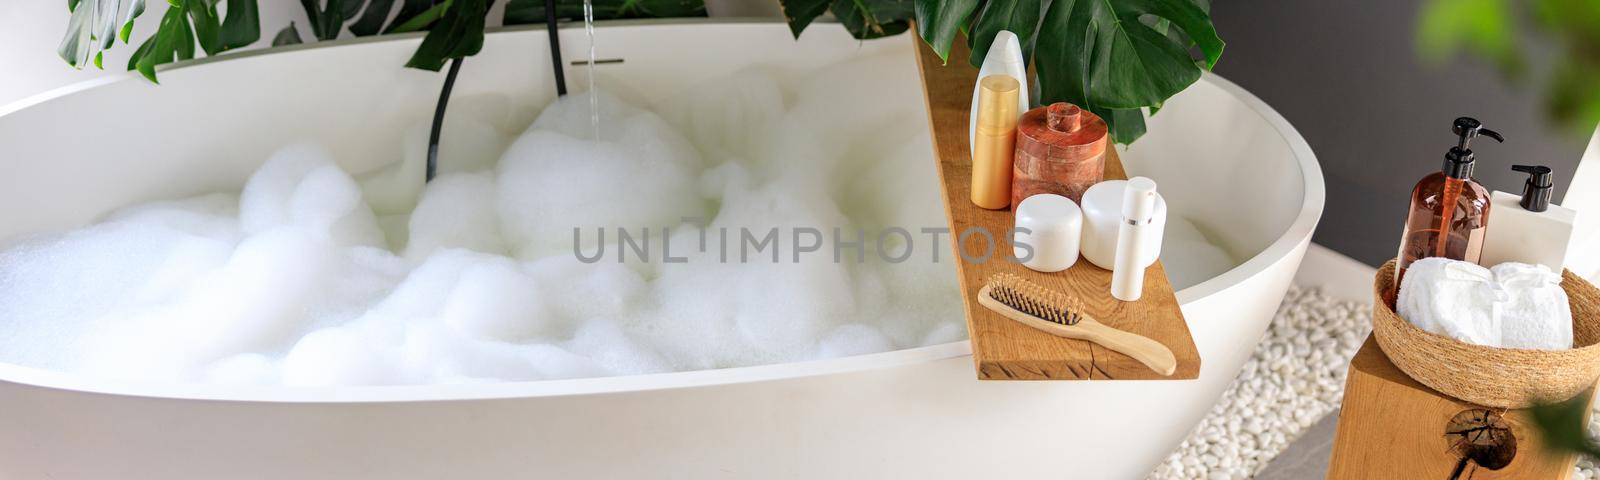 Modern bathroom interior with white bubble filled bathtub and monstera tropical plant. Eco body care products on wooden home decor elements. Concept of organic cosmetics, spa